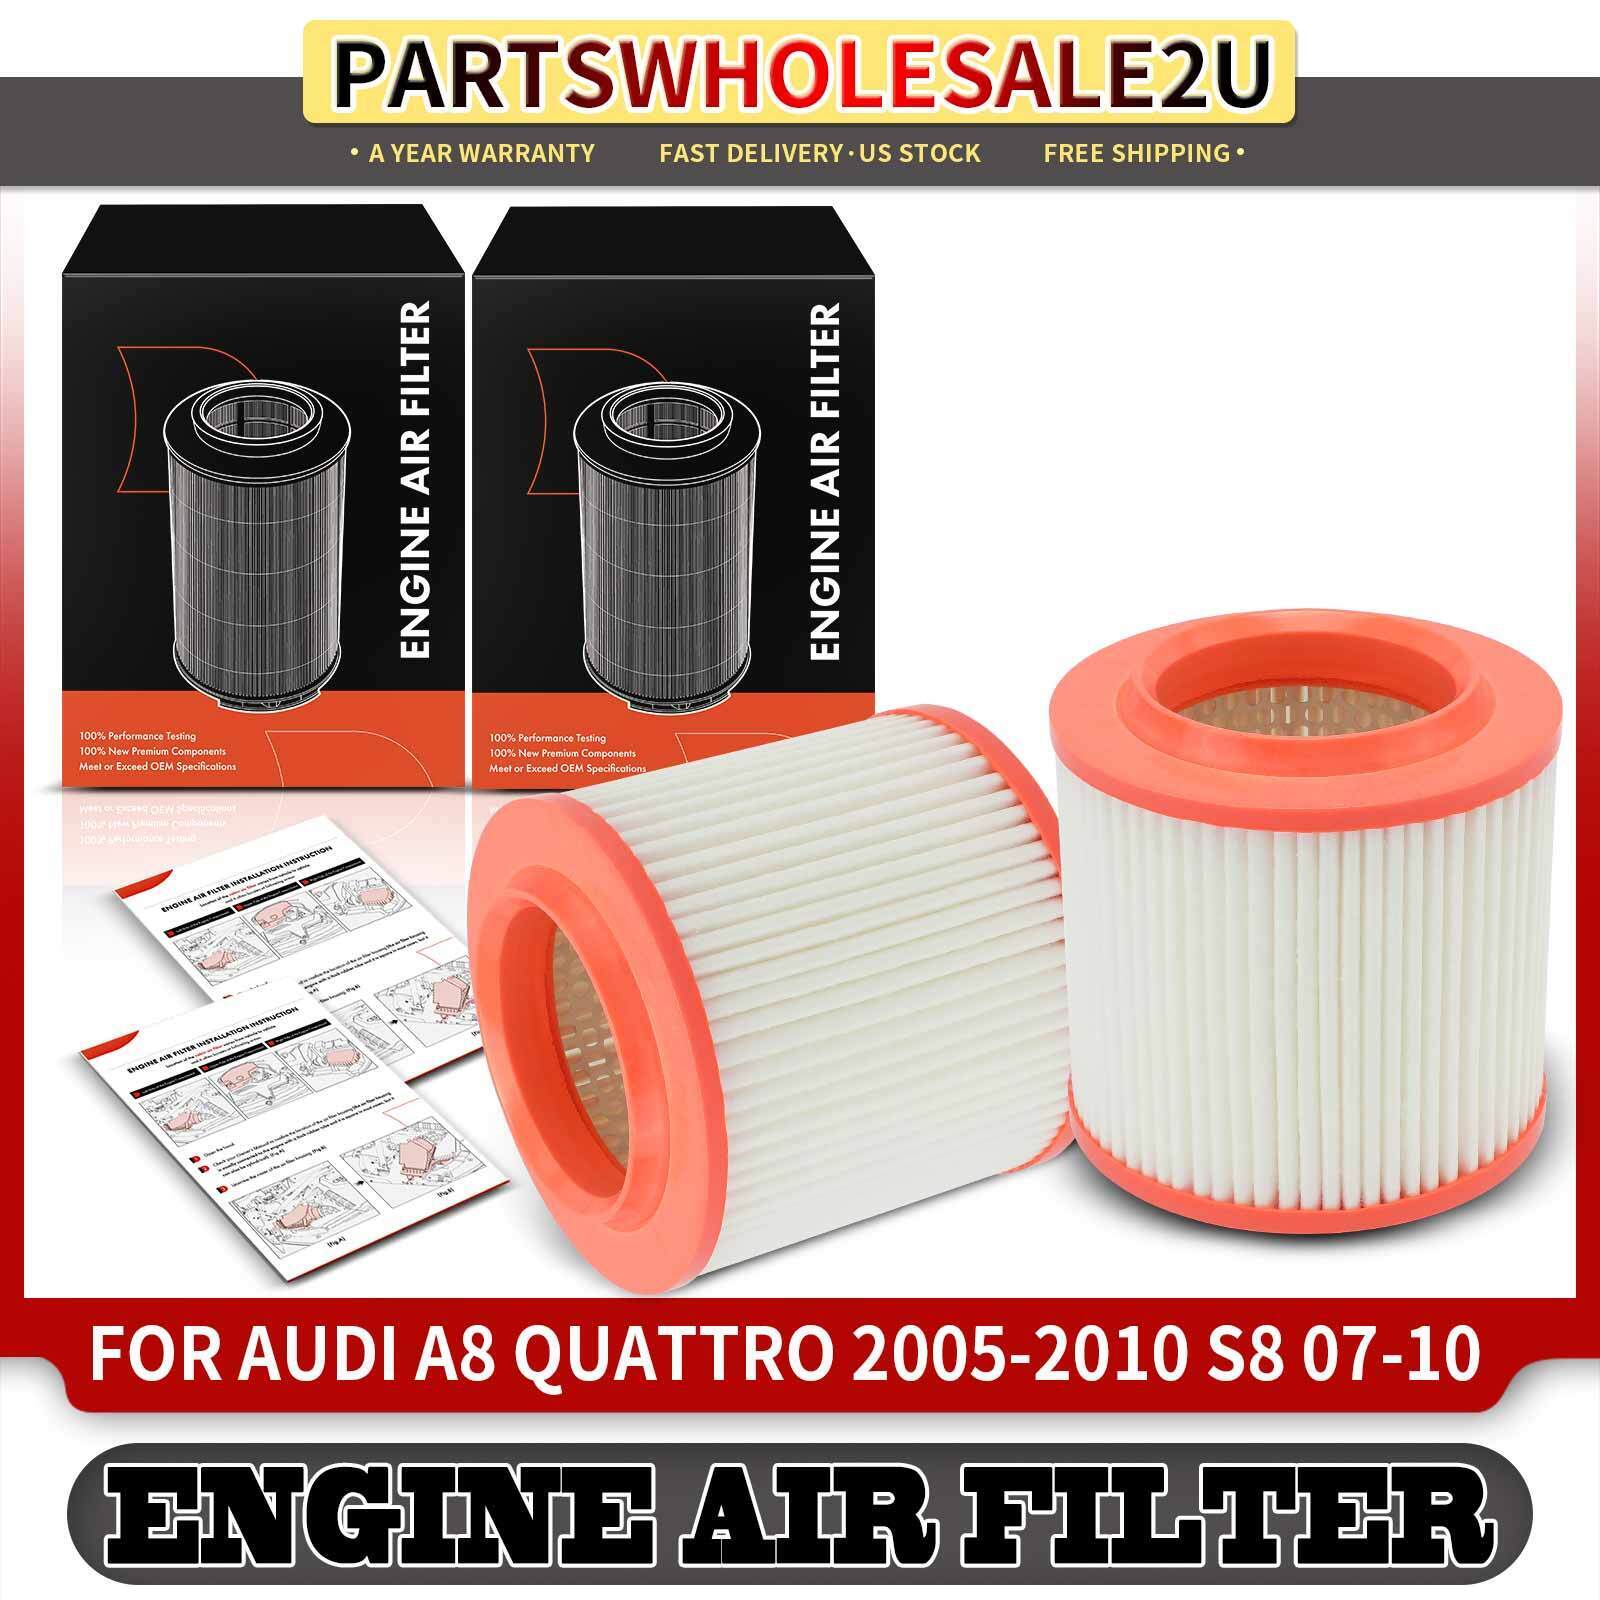 2x New Engine Air Filter for Audi A8 Quattro 2005-2010 S8 2007-2010 5.2L 6.0L